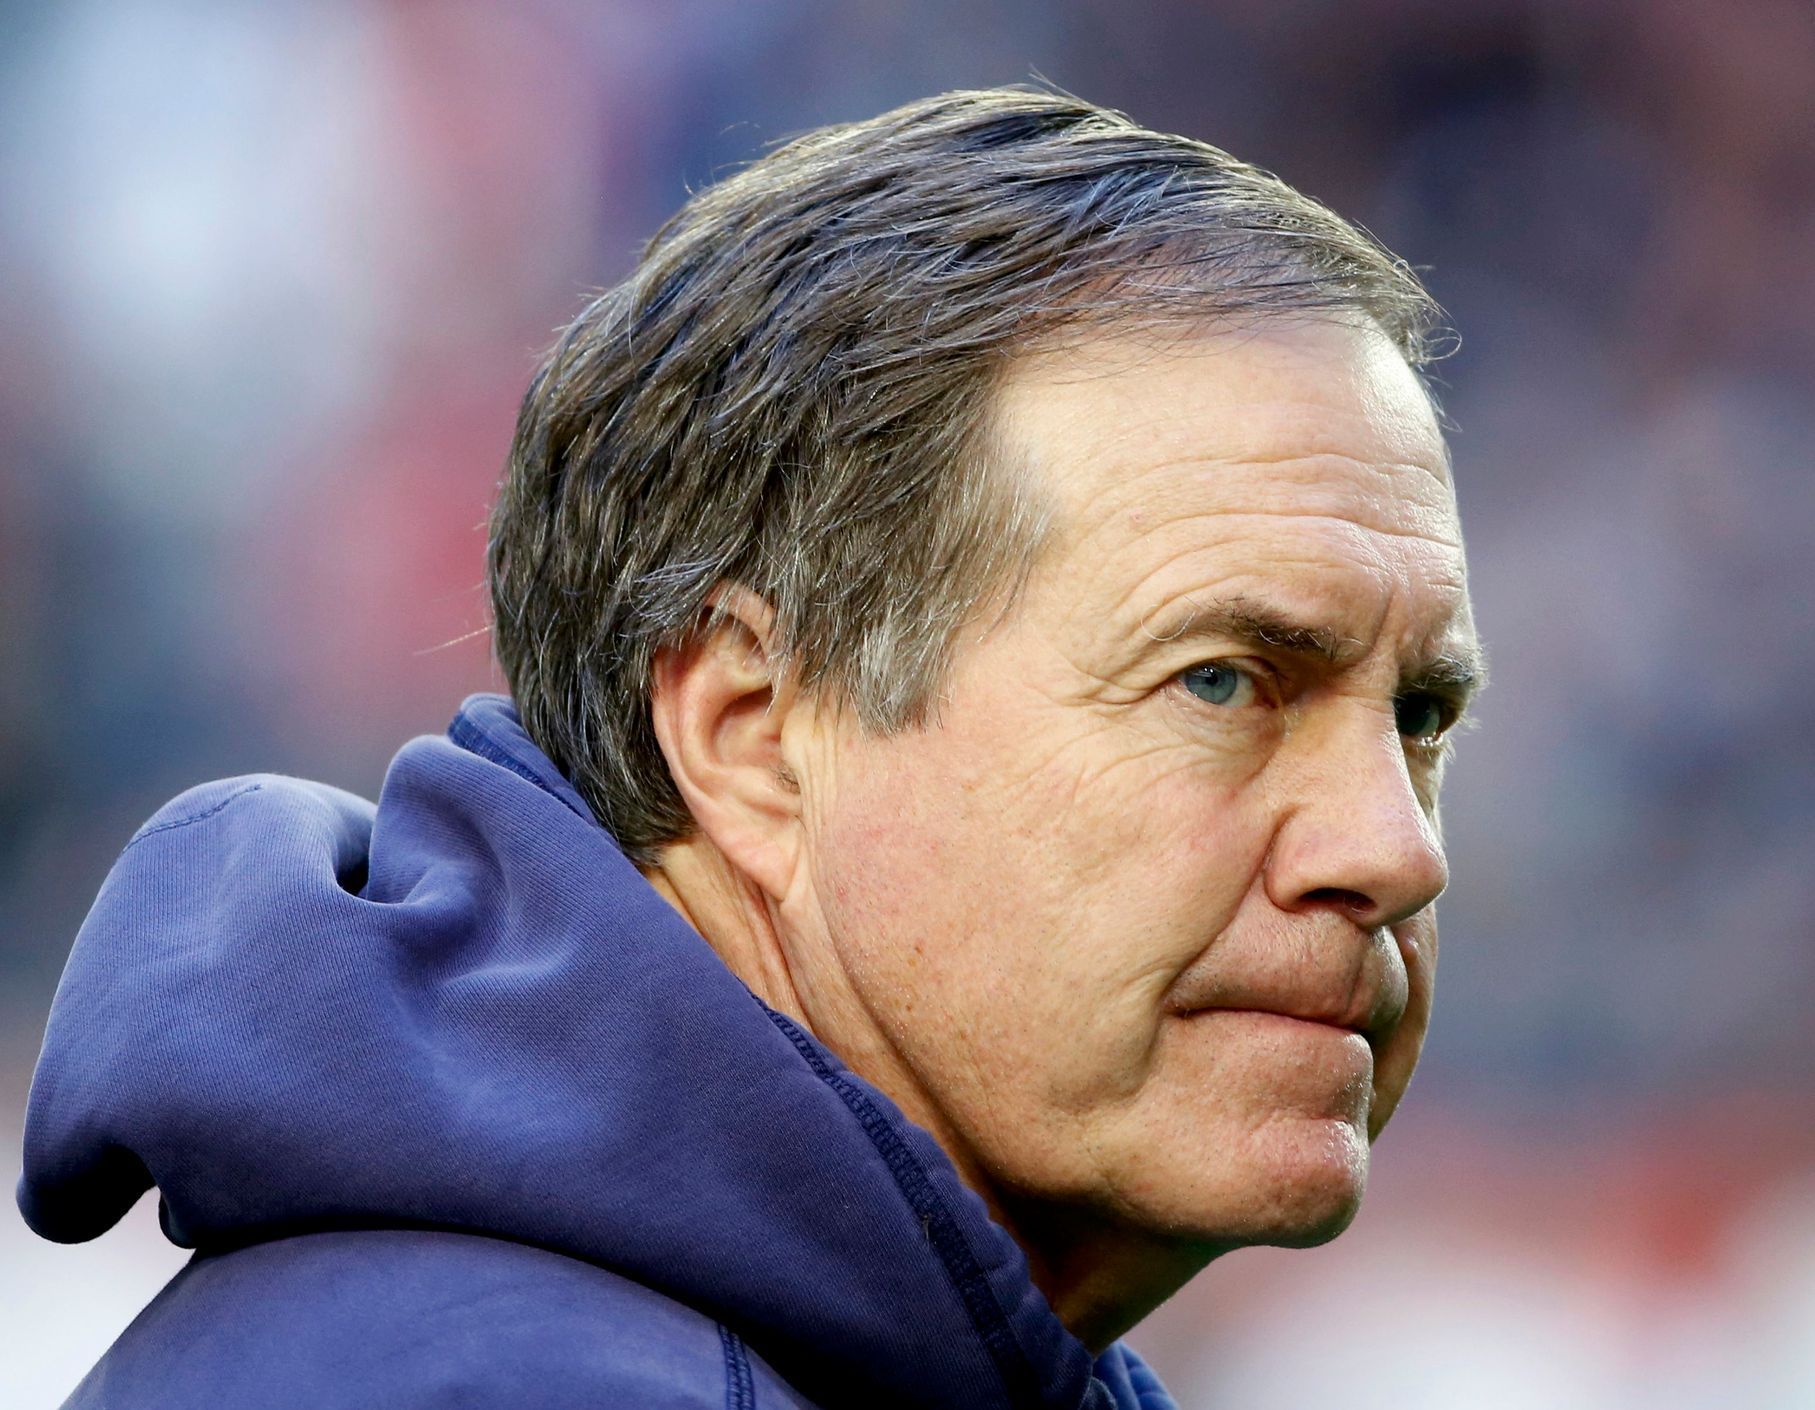 New England Patriots head coach Bill Belichick looks over his team during warm-ups ahead of the start of the NFL Super Bowl XLIX football game against the Seattle Seahawks in Glendale